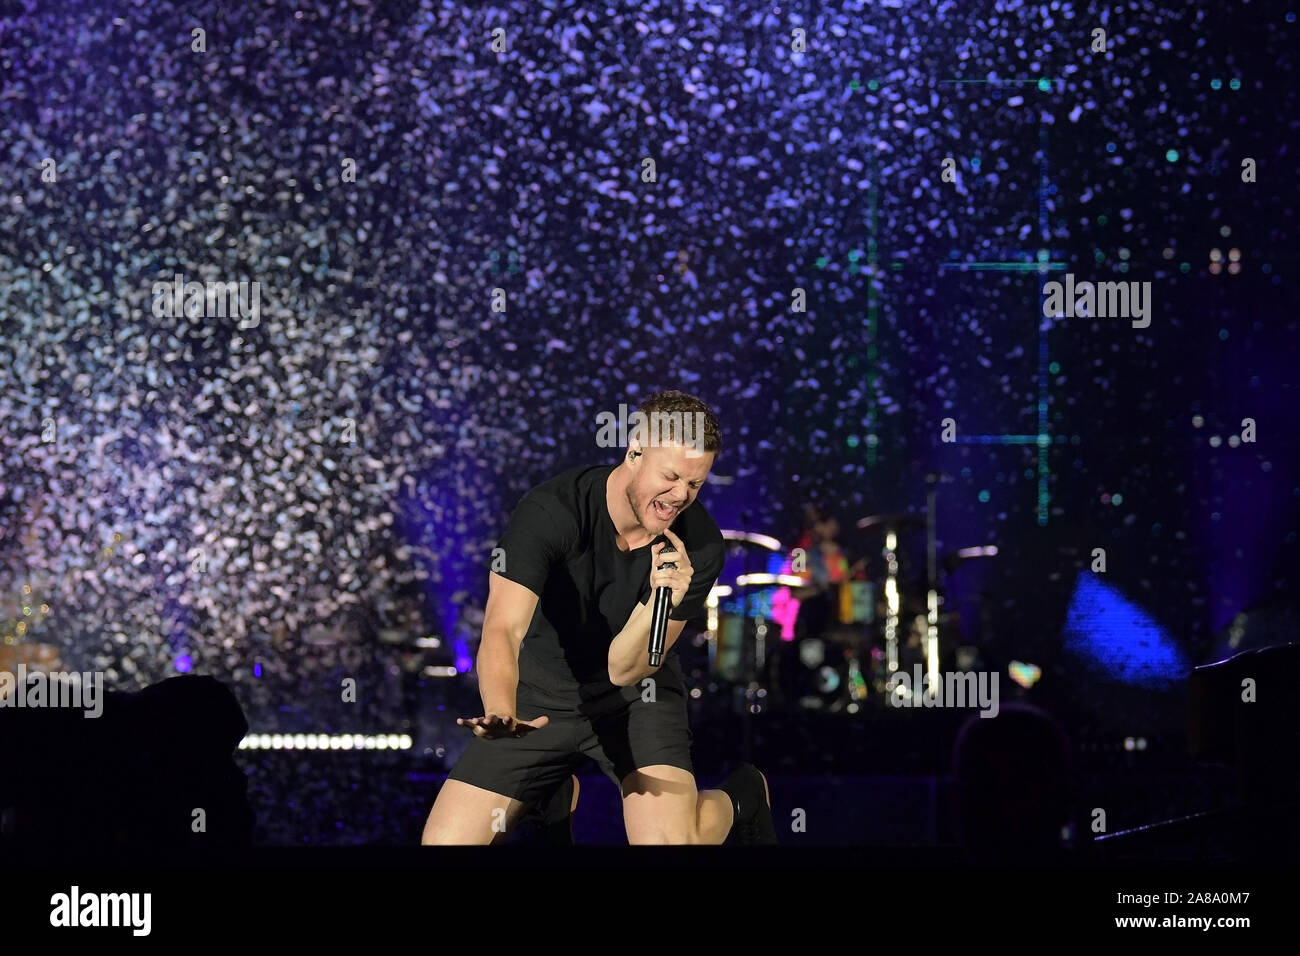 Rio de Janeiro, Brazil, October 6, 2019. Lead singer Dan Reynolds of the indie rock band Imagine Dragons during a concert at Rock in Rio 2019 in Rio. Stock Photo